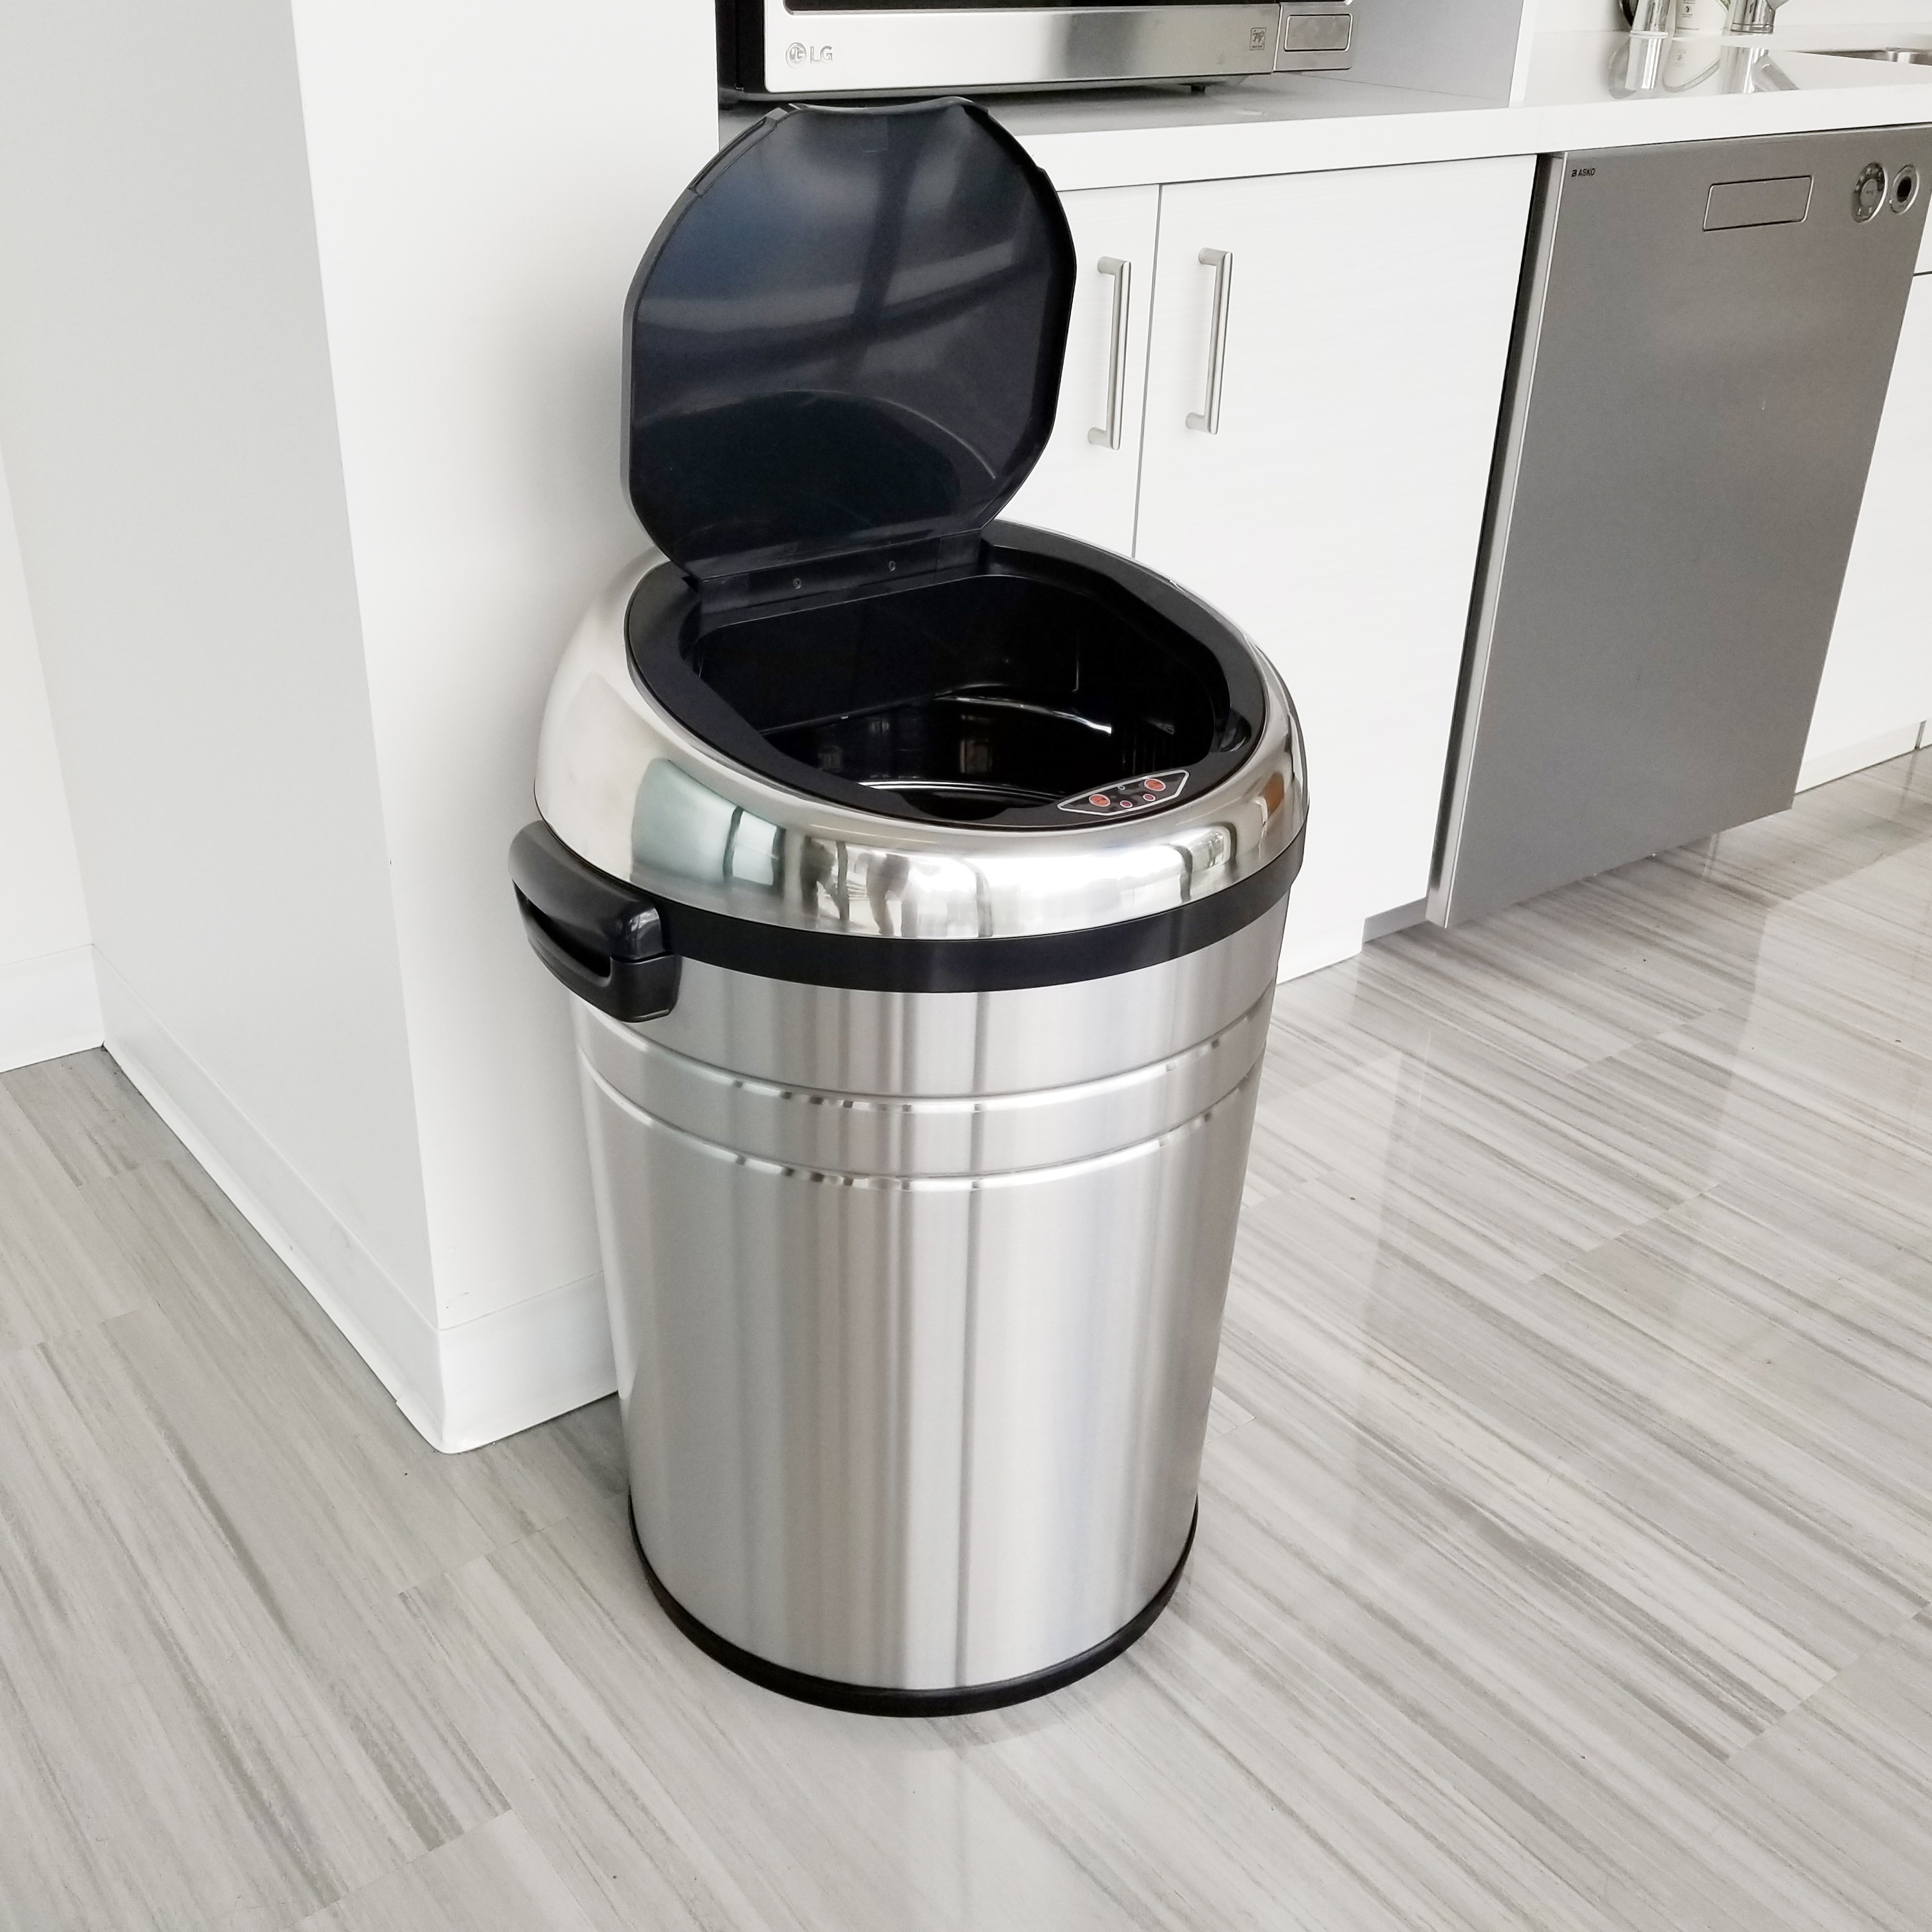 https://ak1.ostkcdn.com/images/products/2604810/iTouchless-18-Gal.-Stainless-Steel-Motion-Sensing-Touchless-Trash-Can-with-Dual-Filters-26ede492-d439-479e-a9f6-cd81ff316a0f.jpg